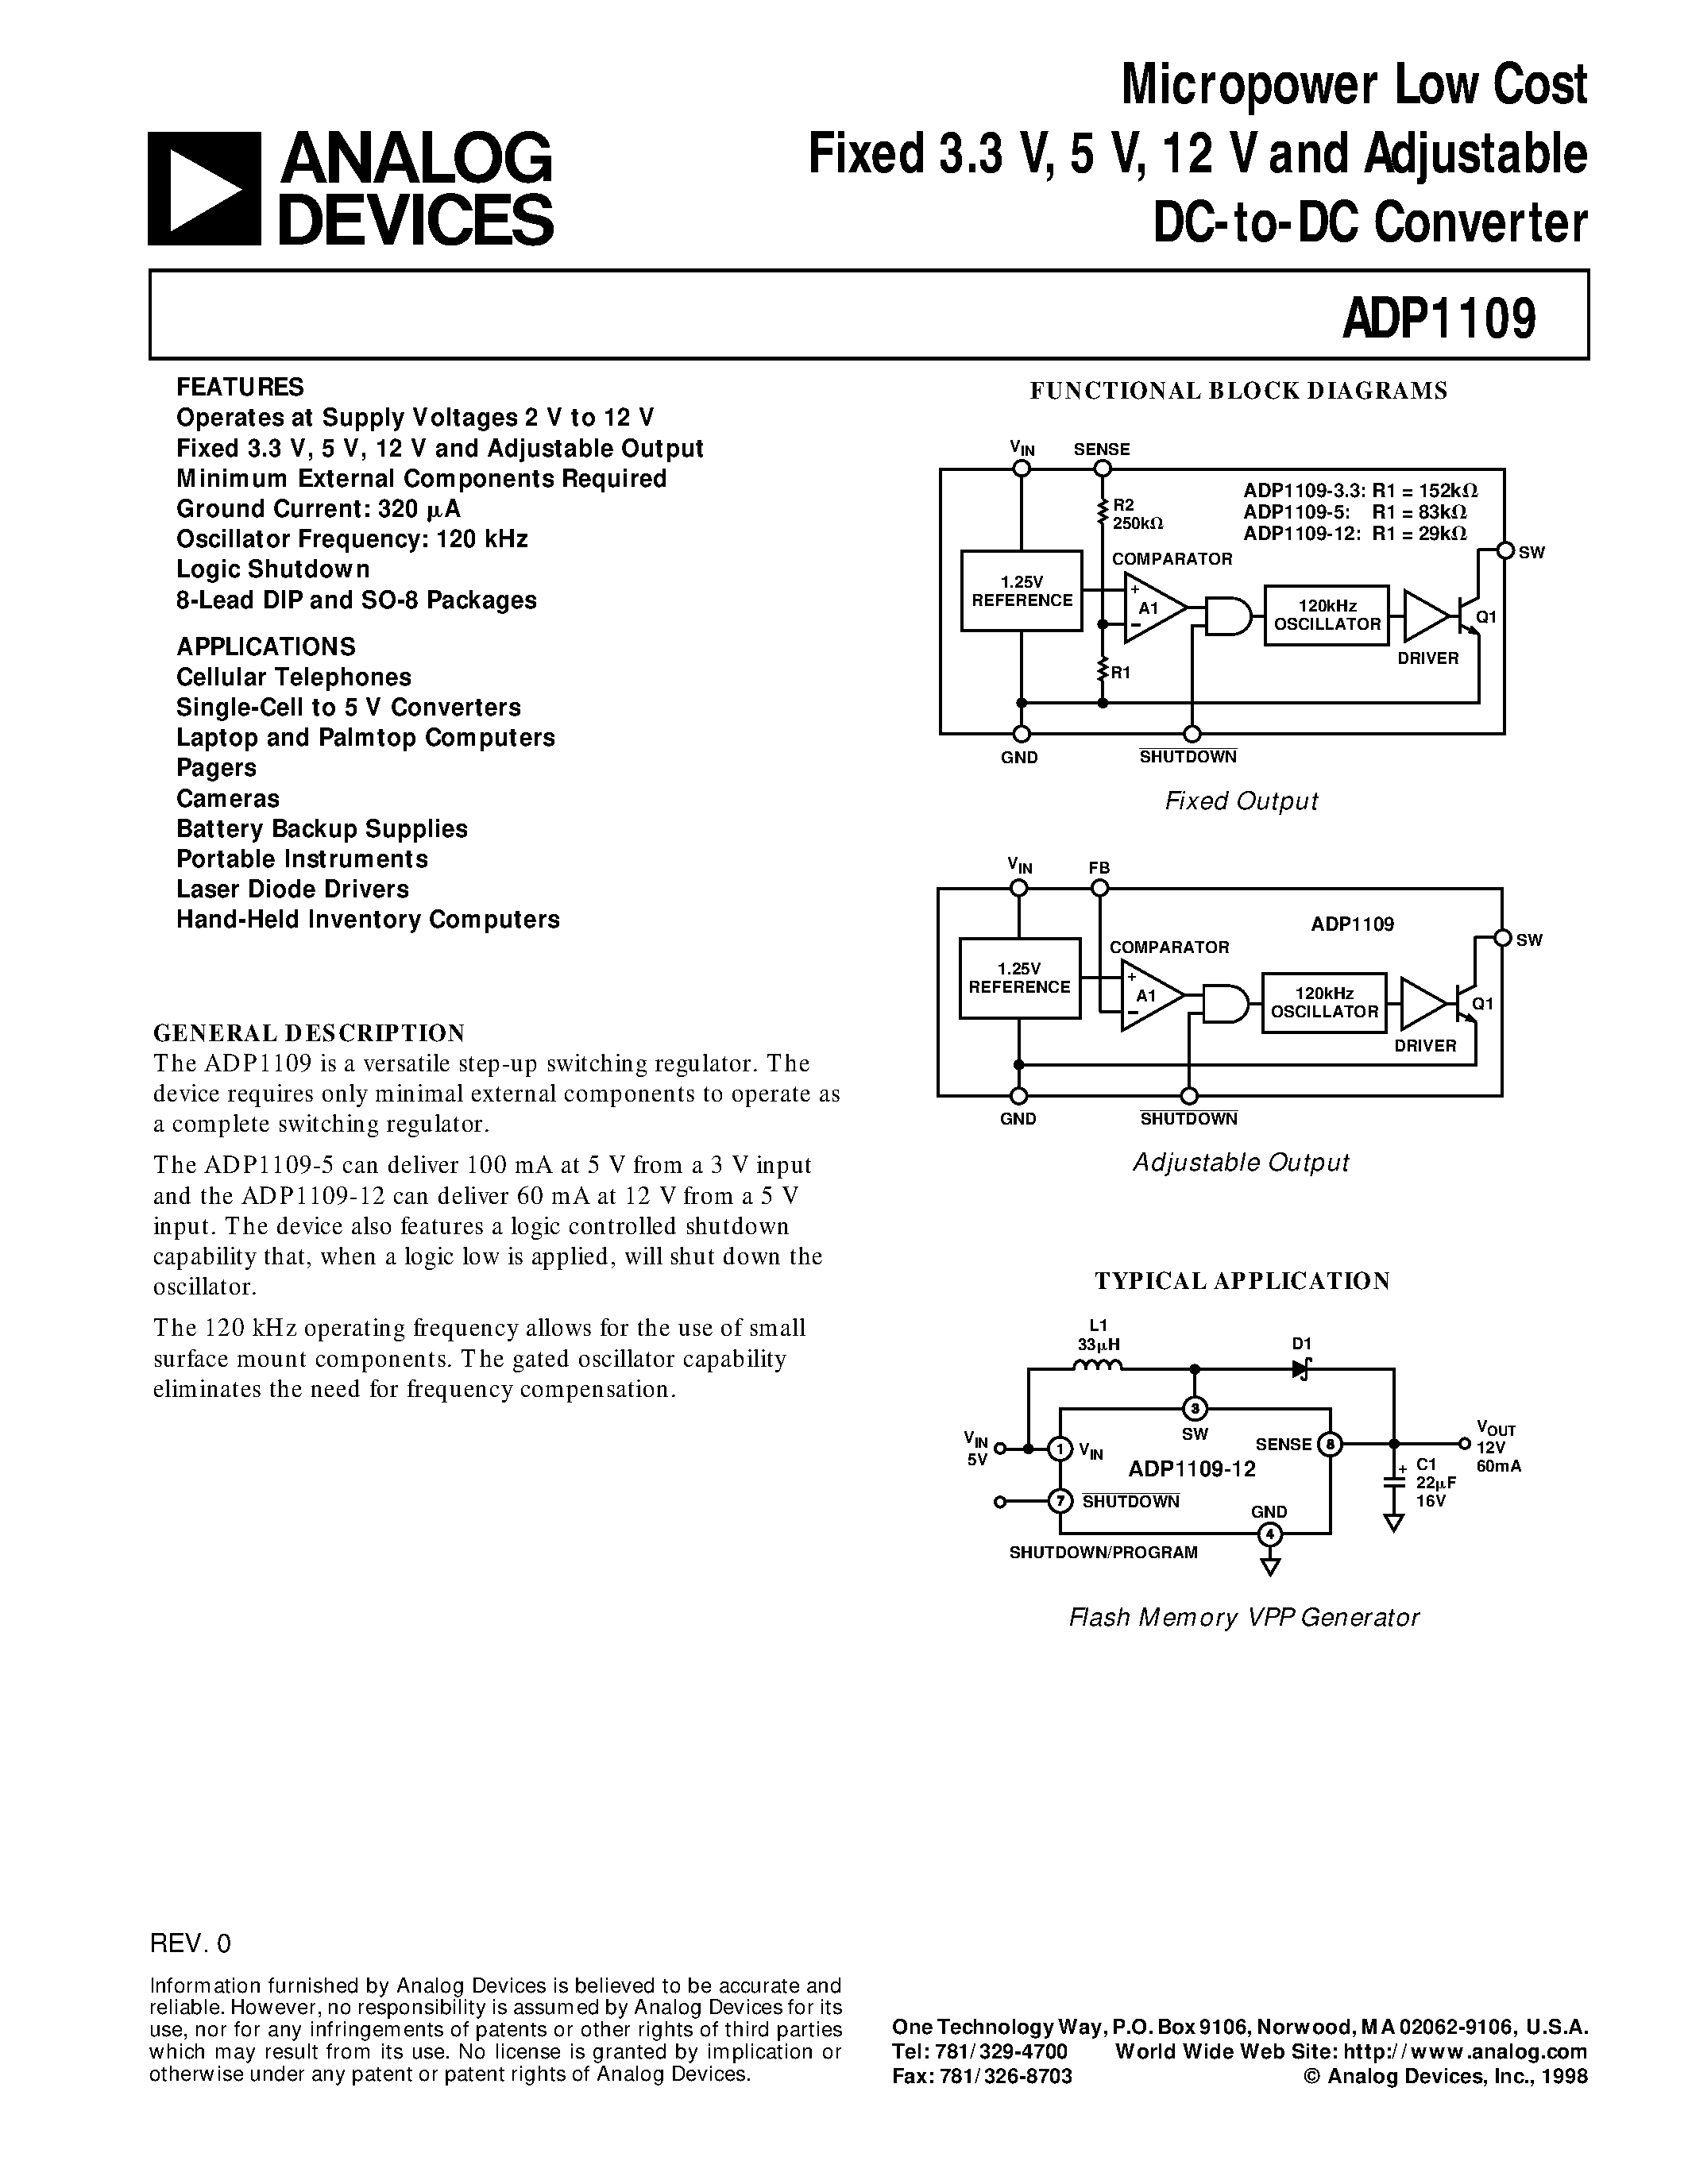 Даташит ADP1109AR-5 - Micropower Low Cost Fixed 3.3 V/ 5 V/ 12 V and Adjustable DC-to-DC Converter страница 1